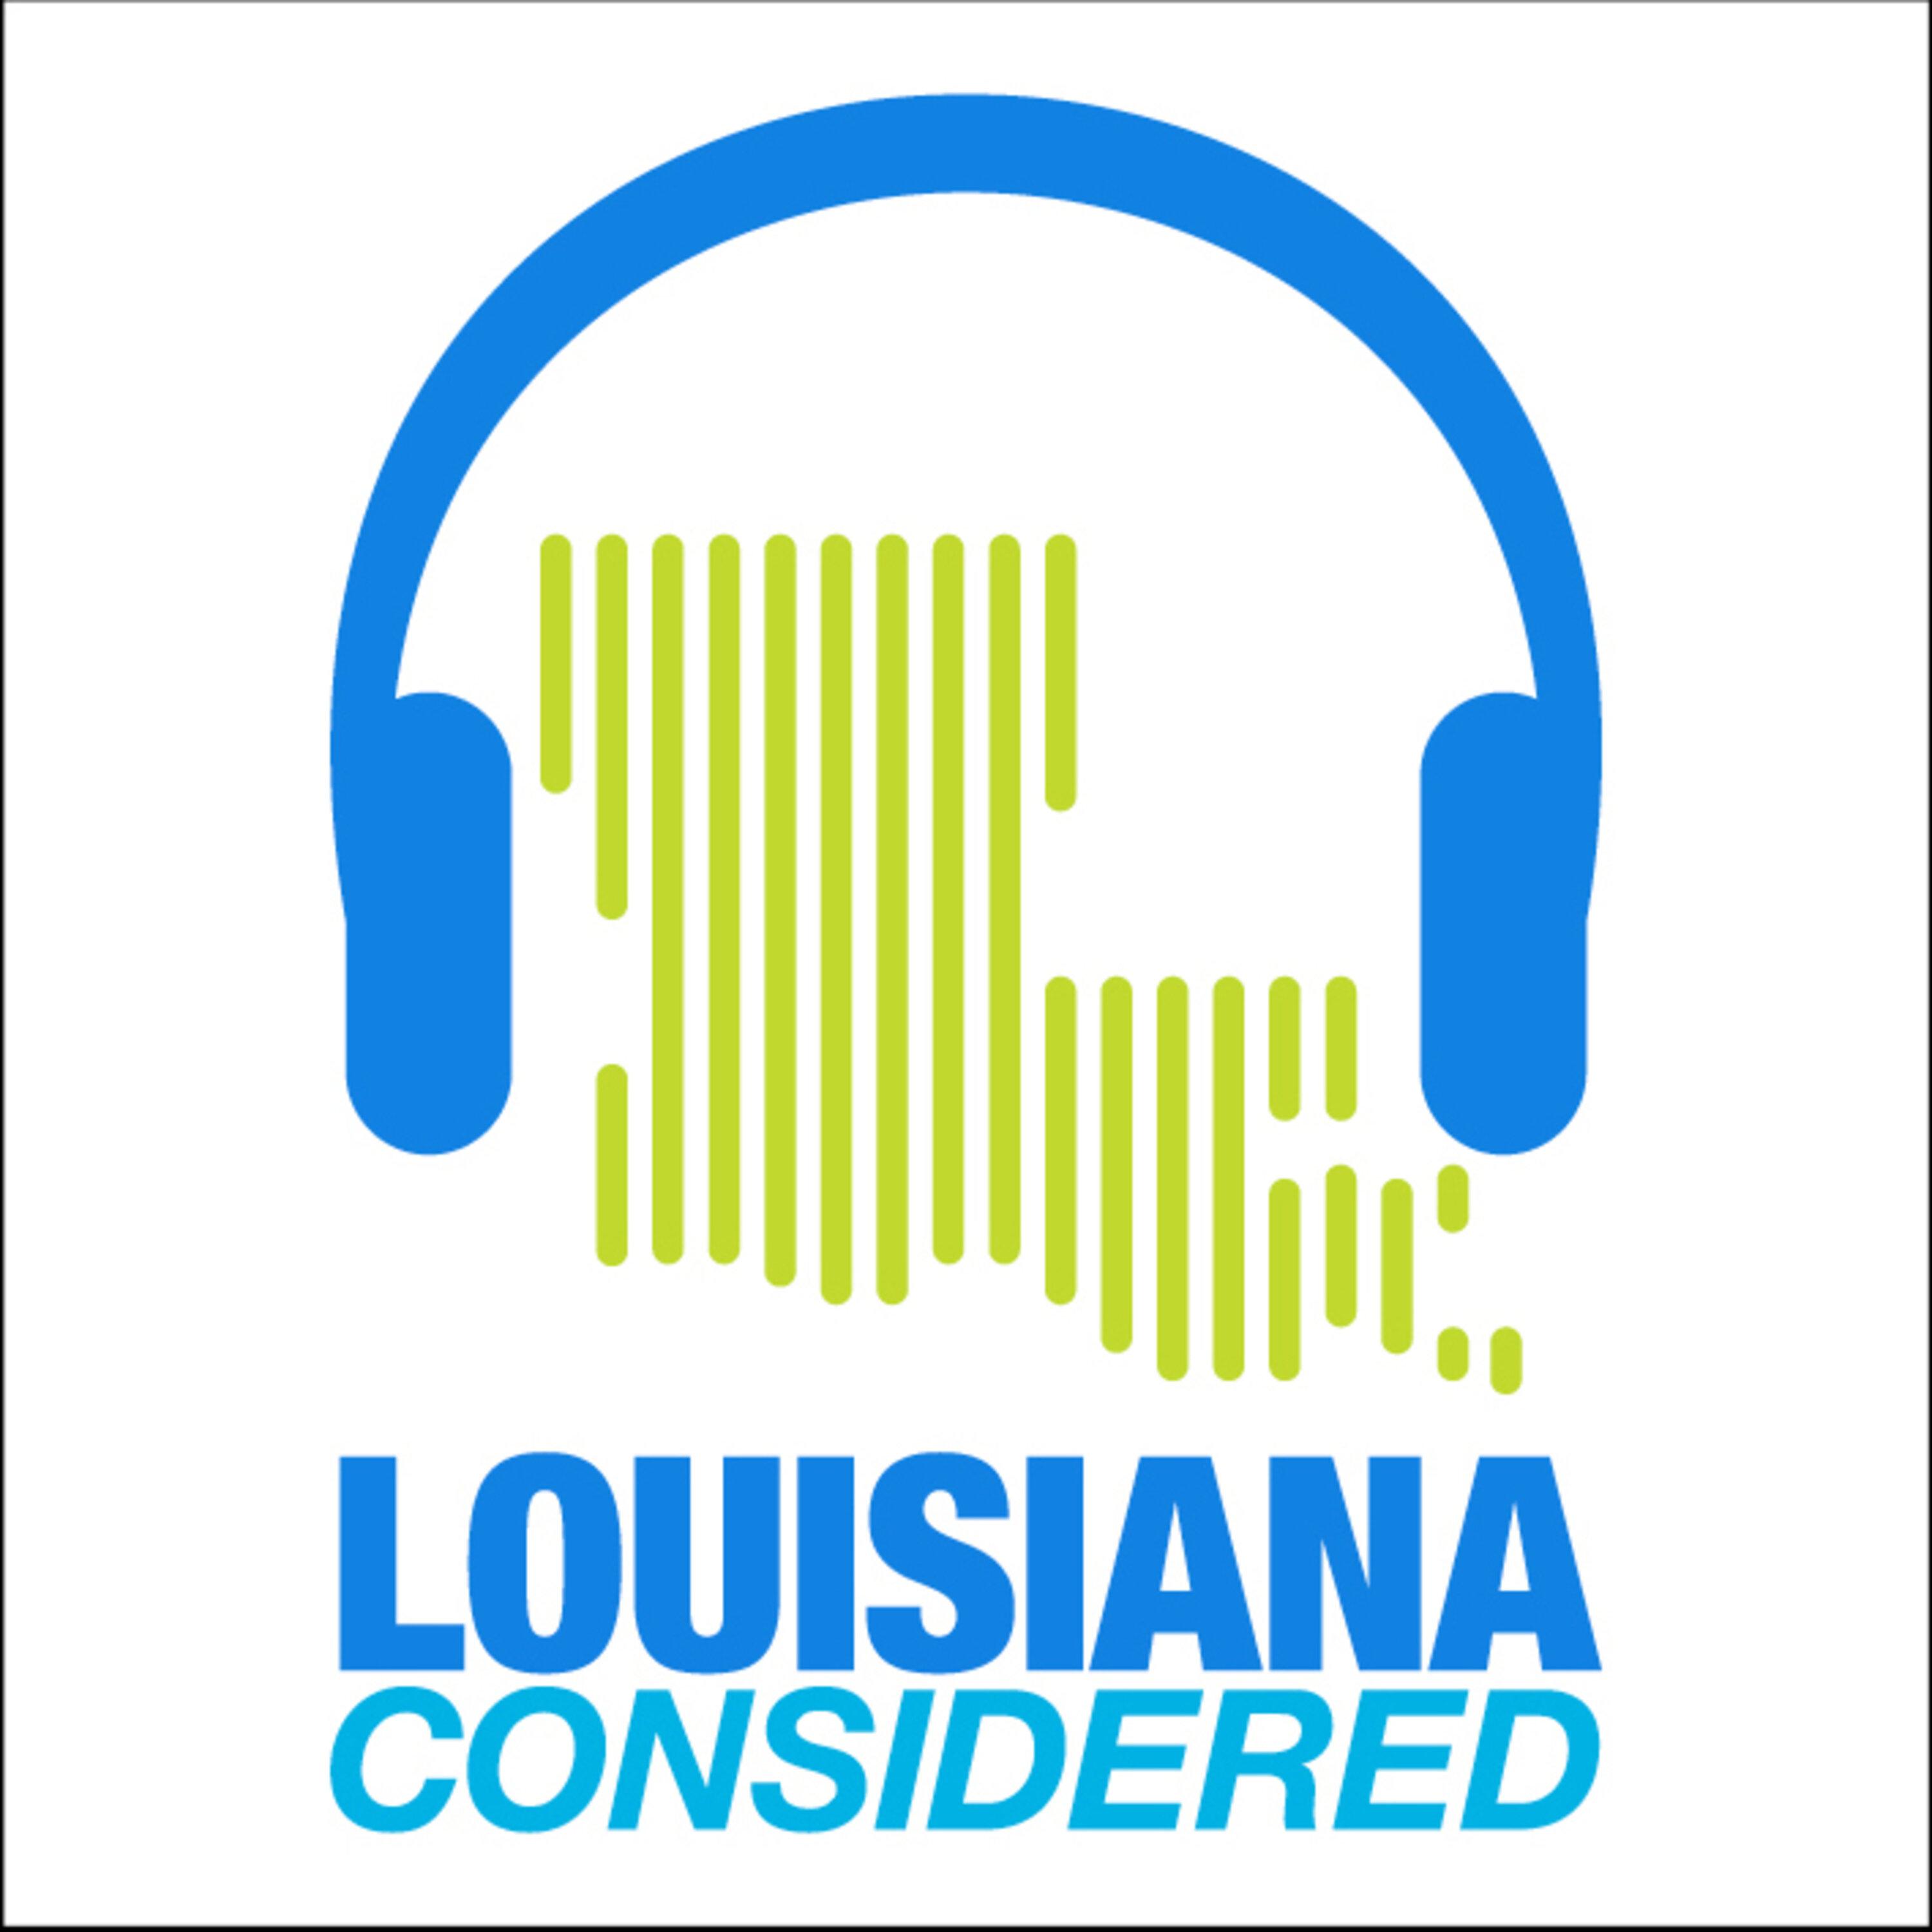 Thumbnail for "Louisiana Considered: Supreme Court case will determine abortion access in Louisiana".